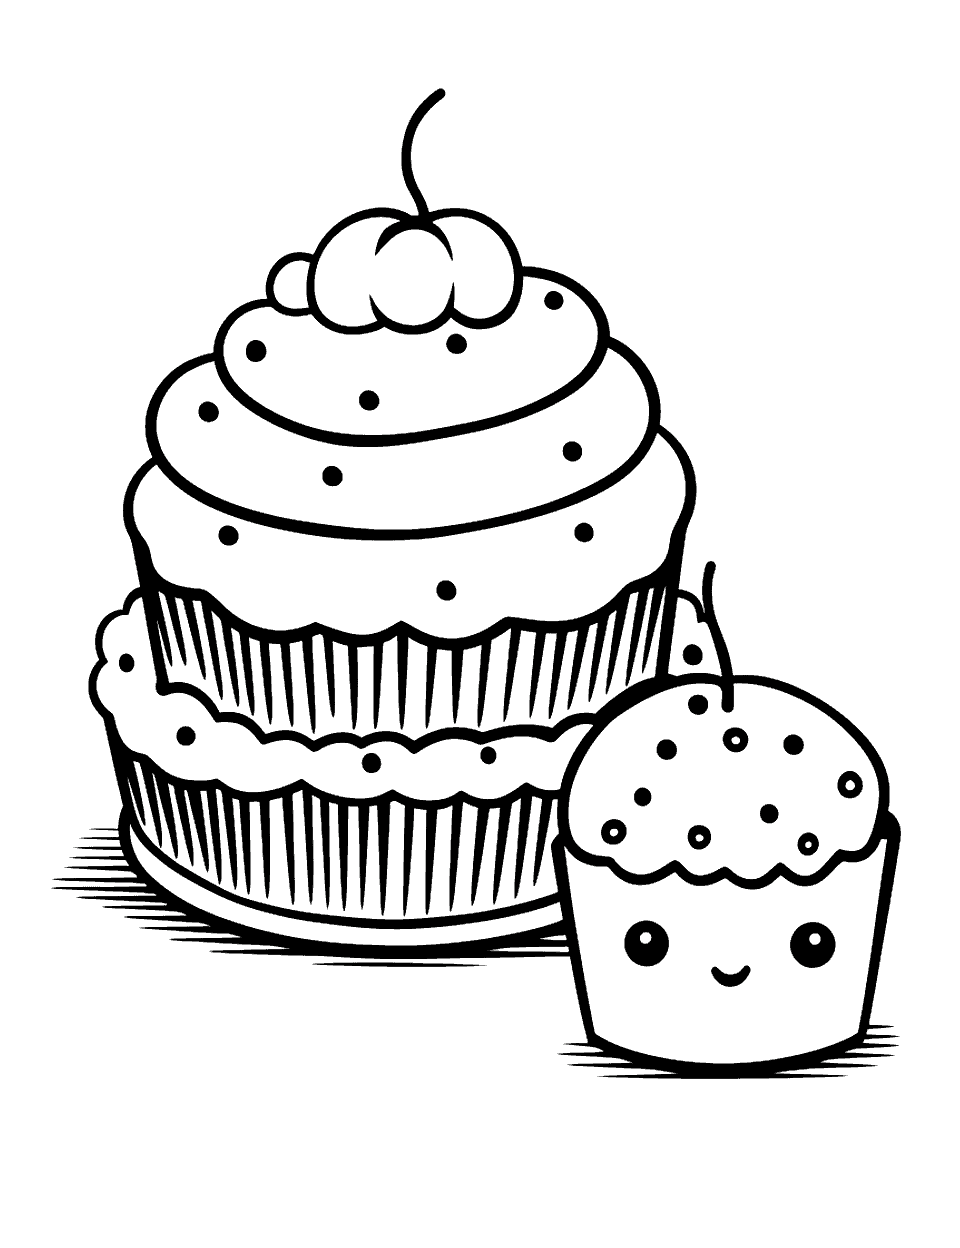 Morning Muffin Cake Coloring Page - A muffin next to a small cake, perfect for a breakfast scene.